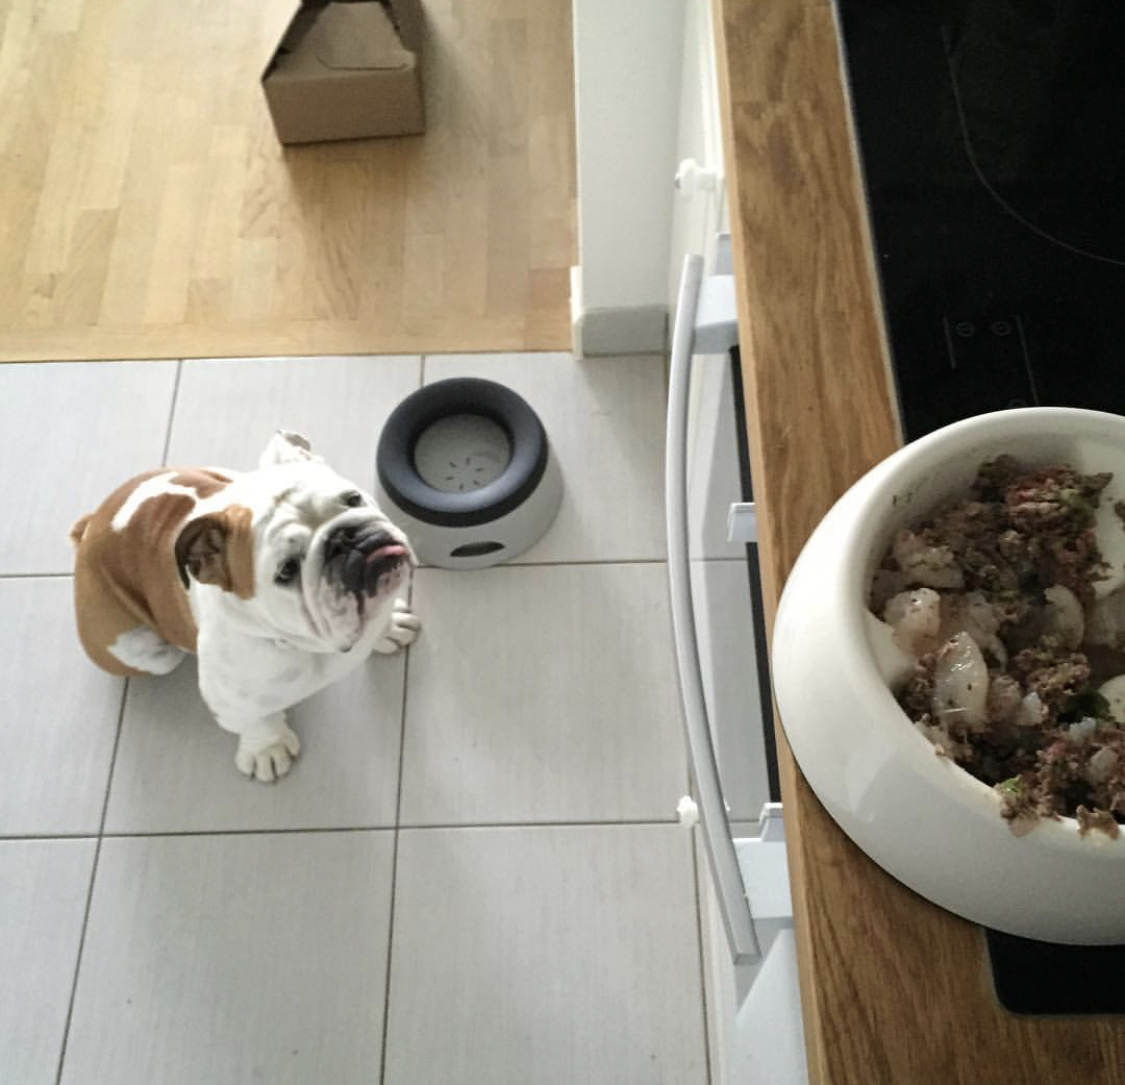 An English Bulldog sitting on the floor while staring at the food on top of the table